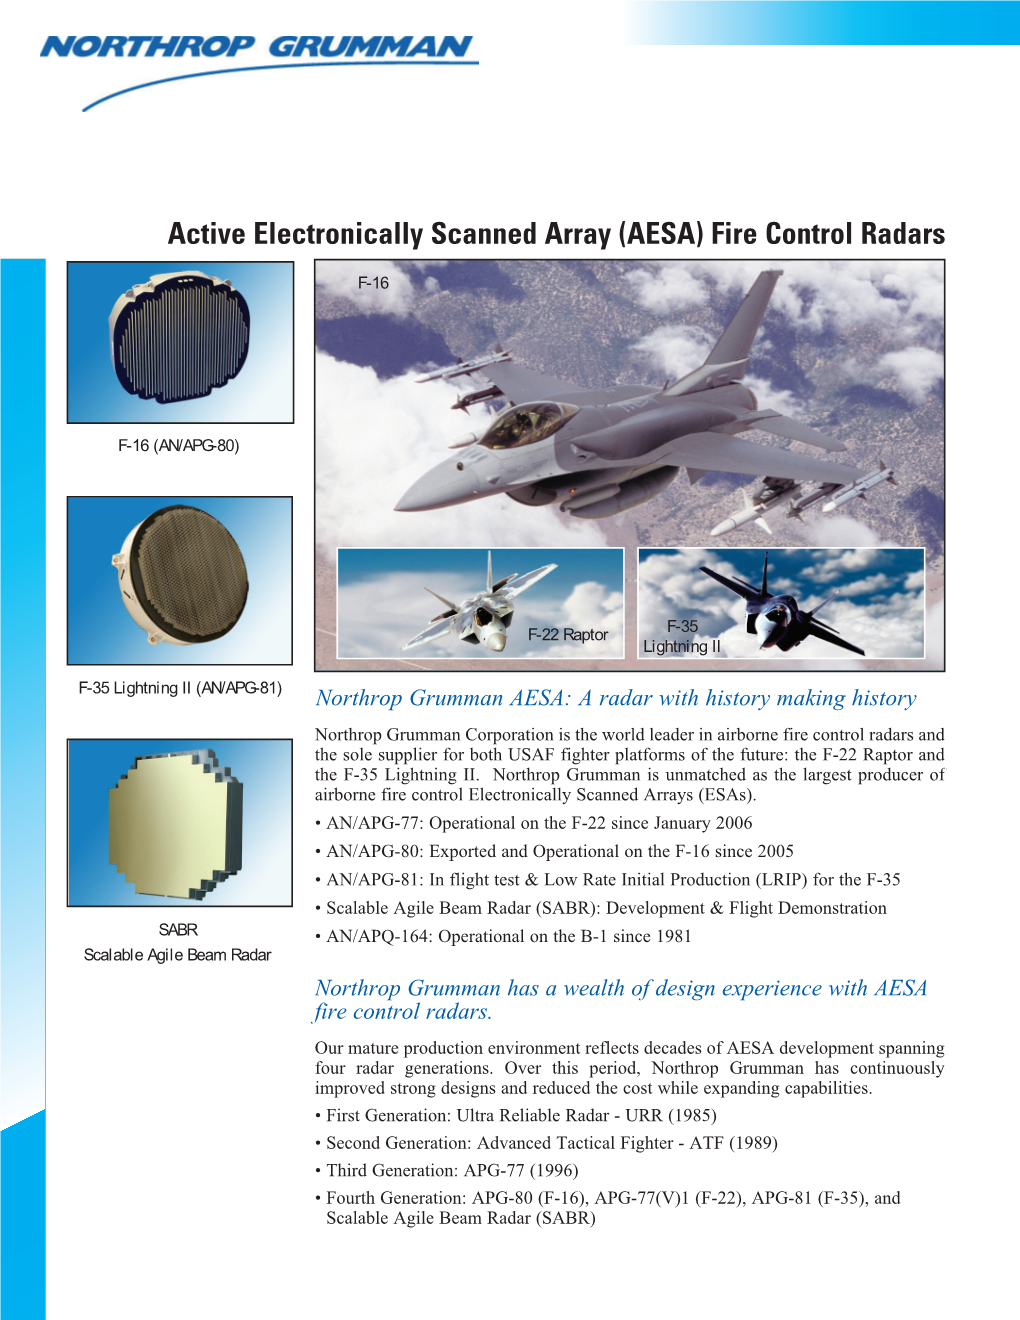 Active Electronically Scanned Array Radars